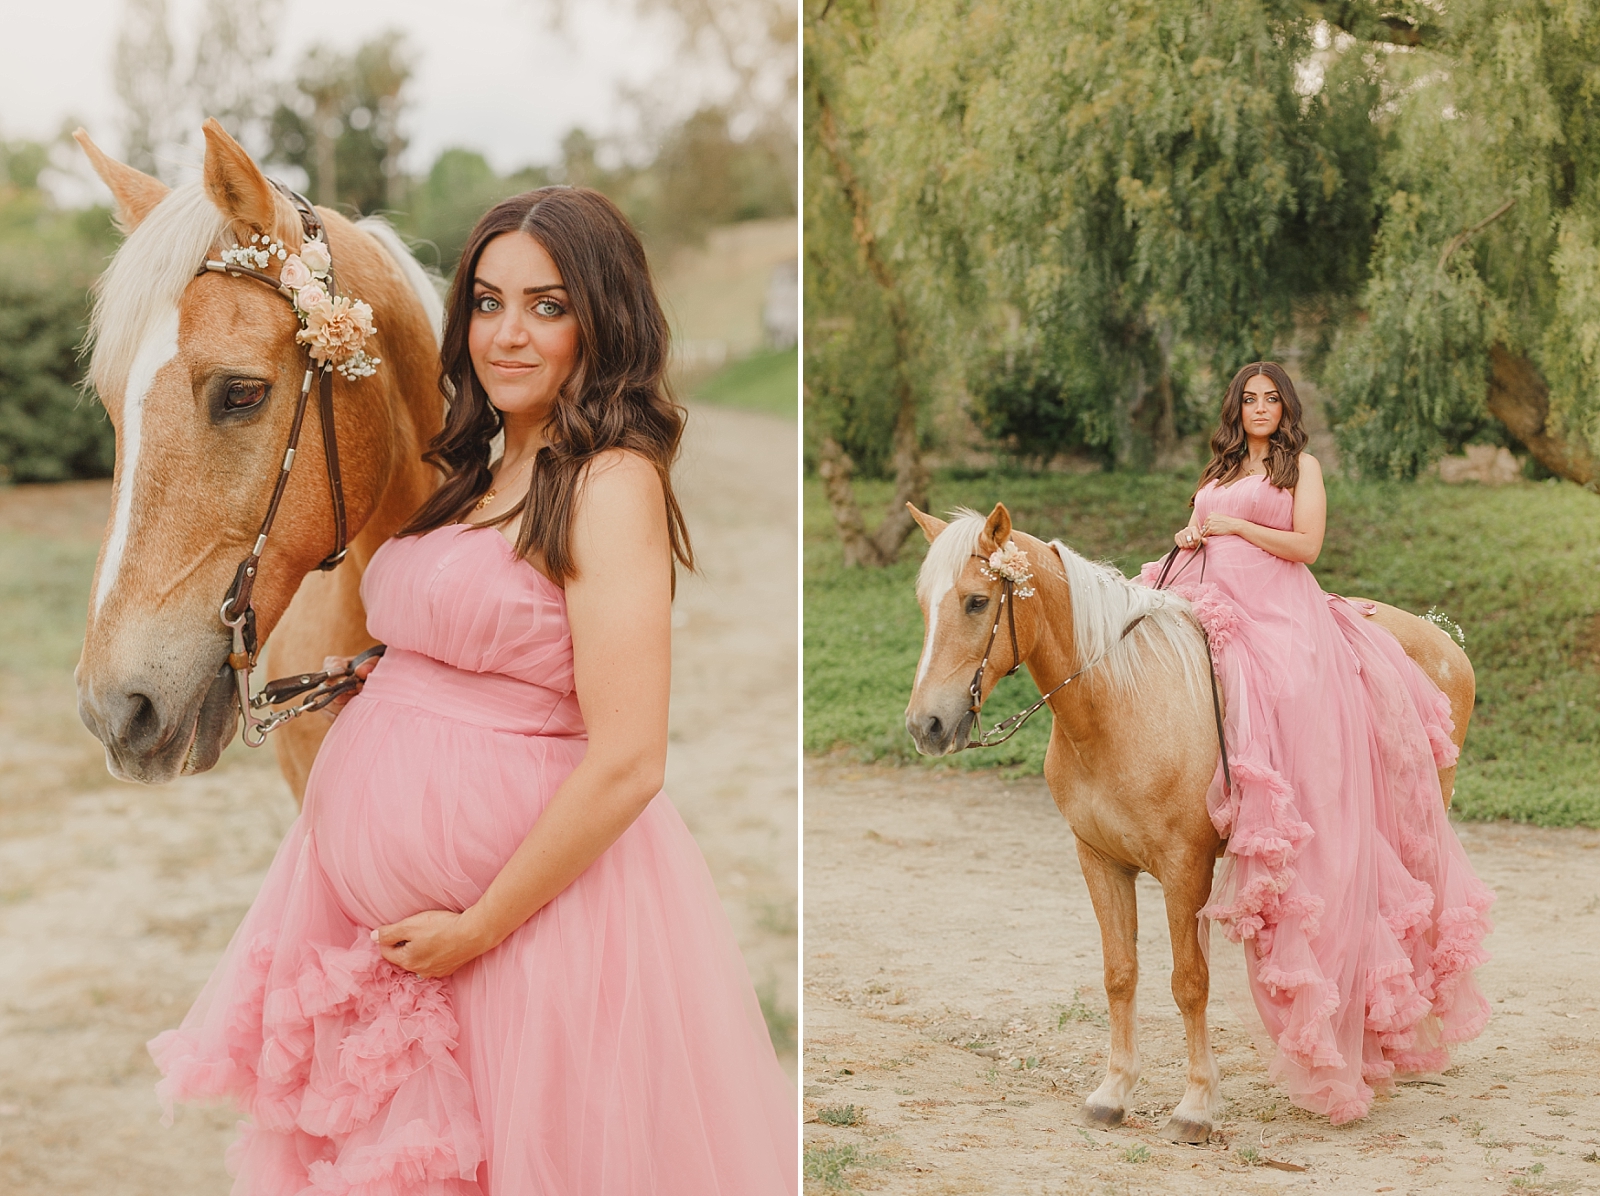 Anaheim fairytale maternity session with a horse